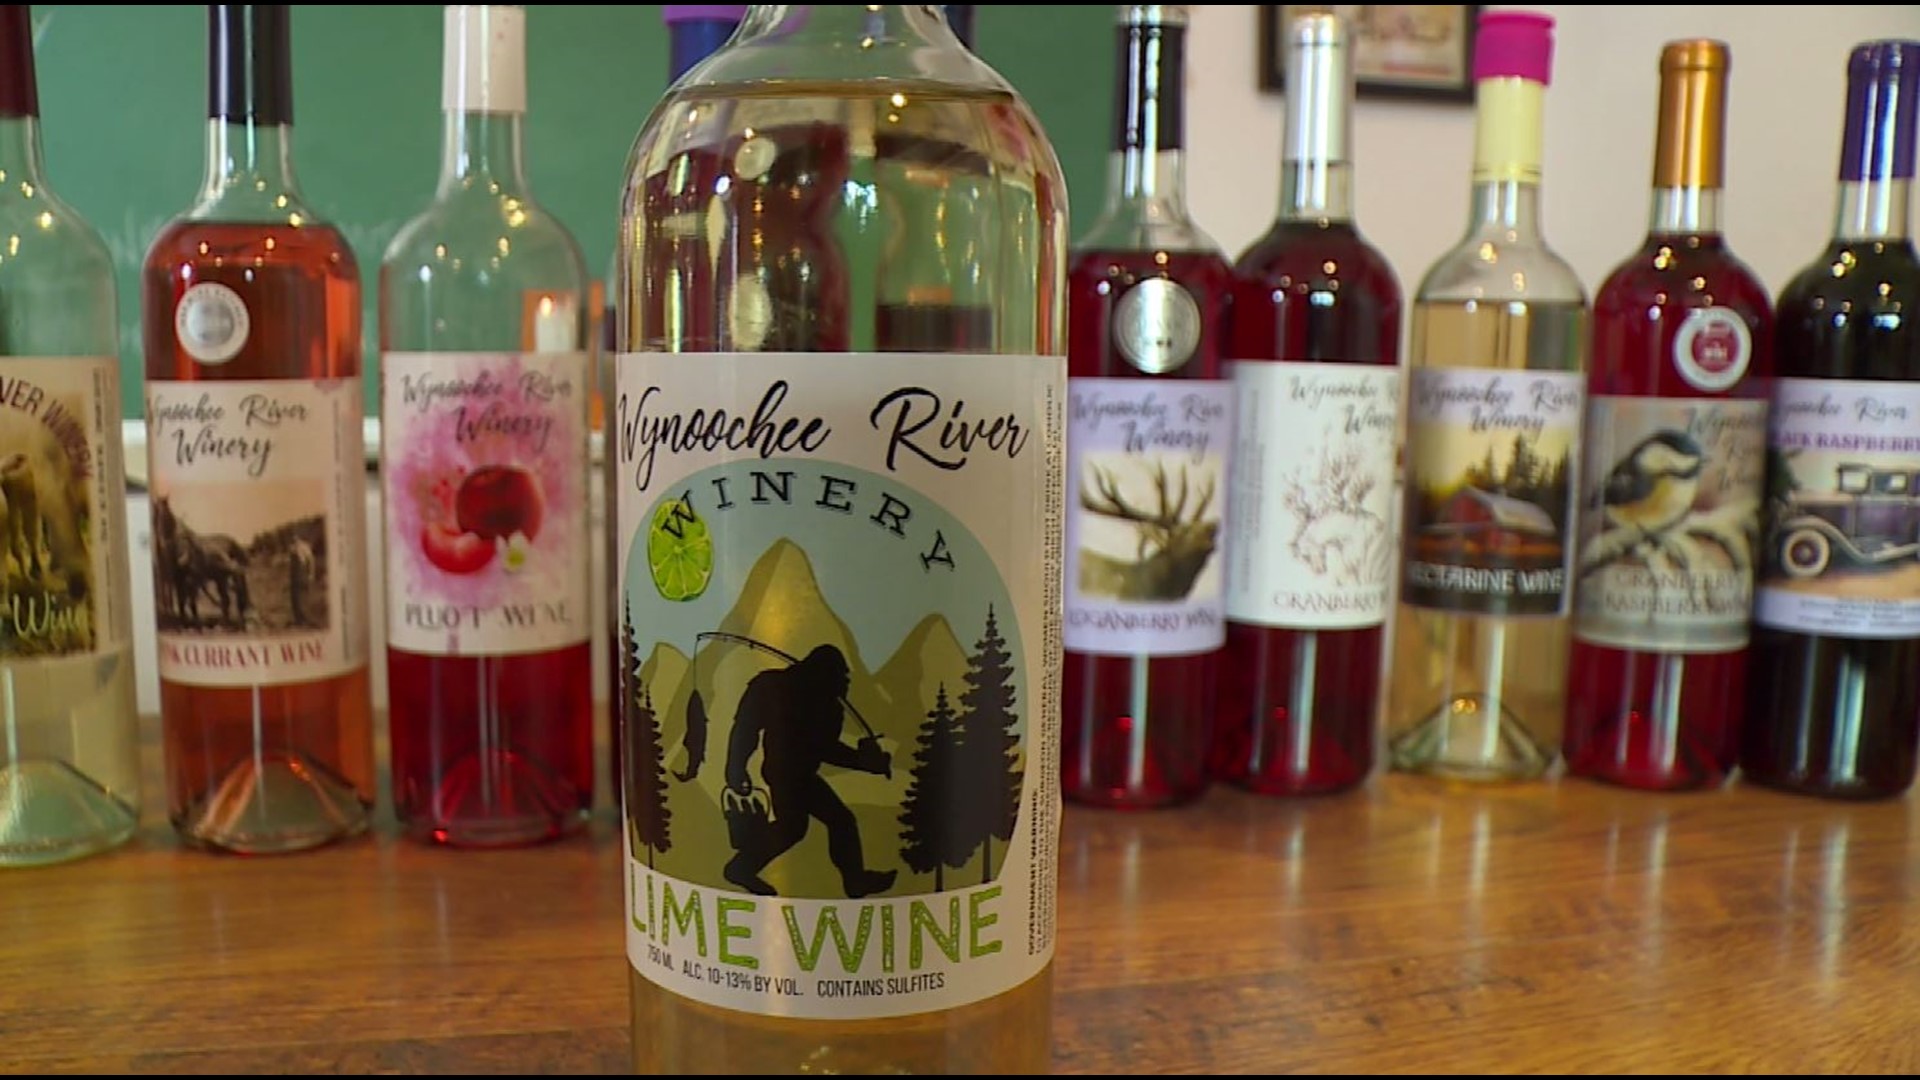 The owners call their business a "hobby gone crazy" 🍷 #k5evening